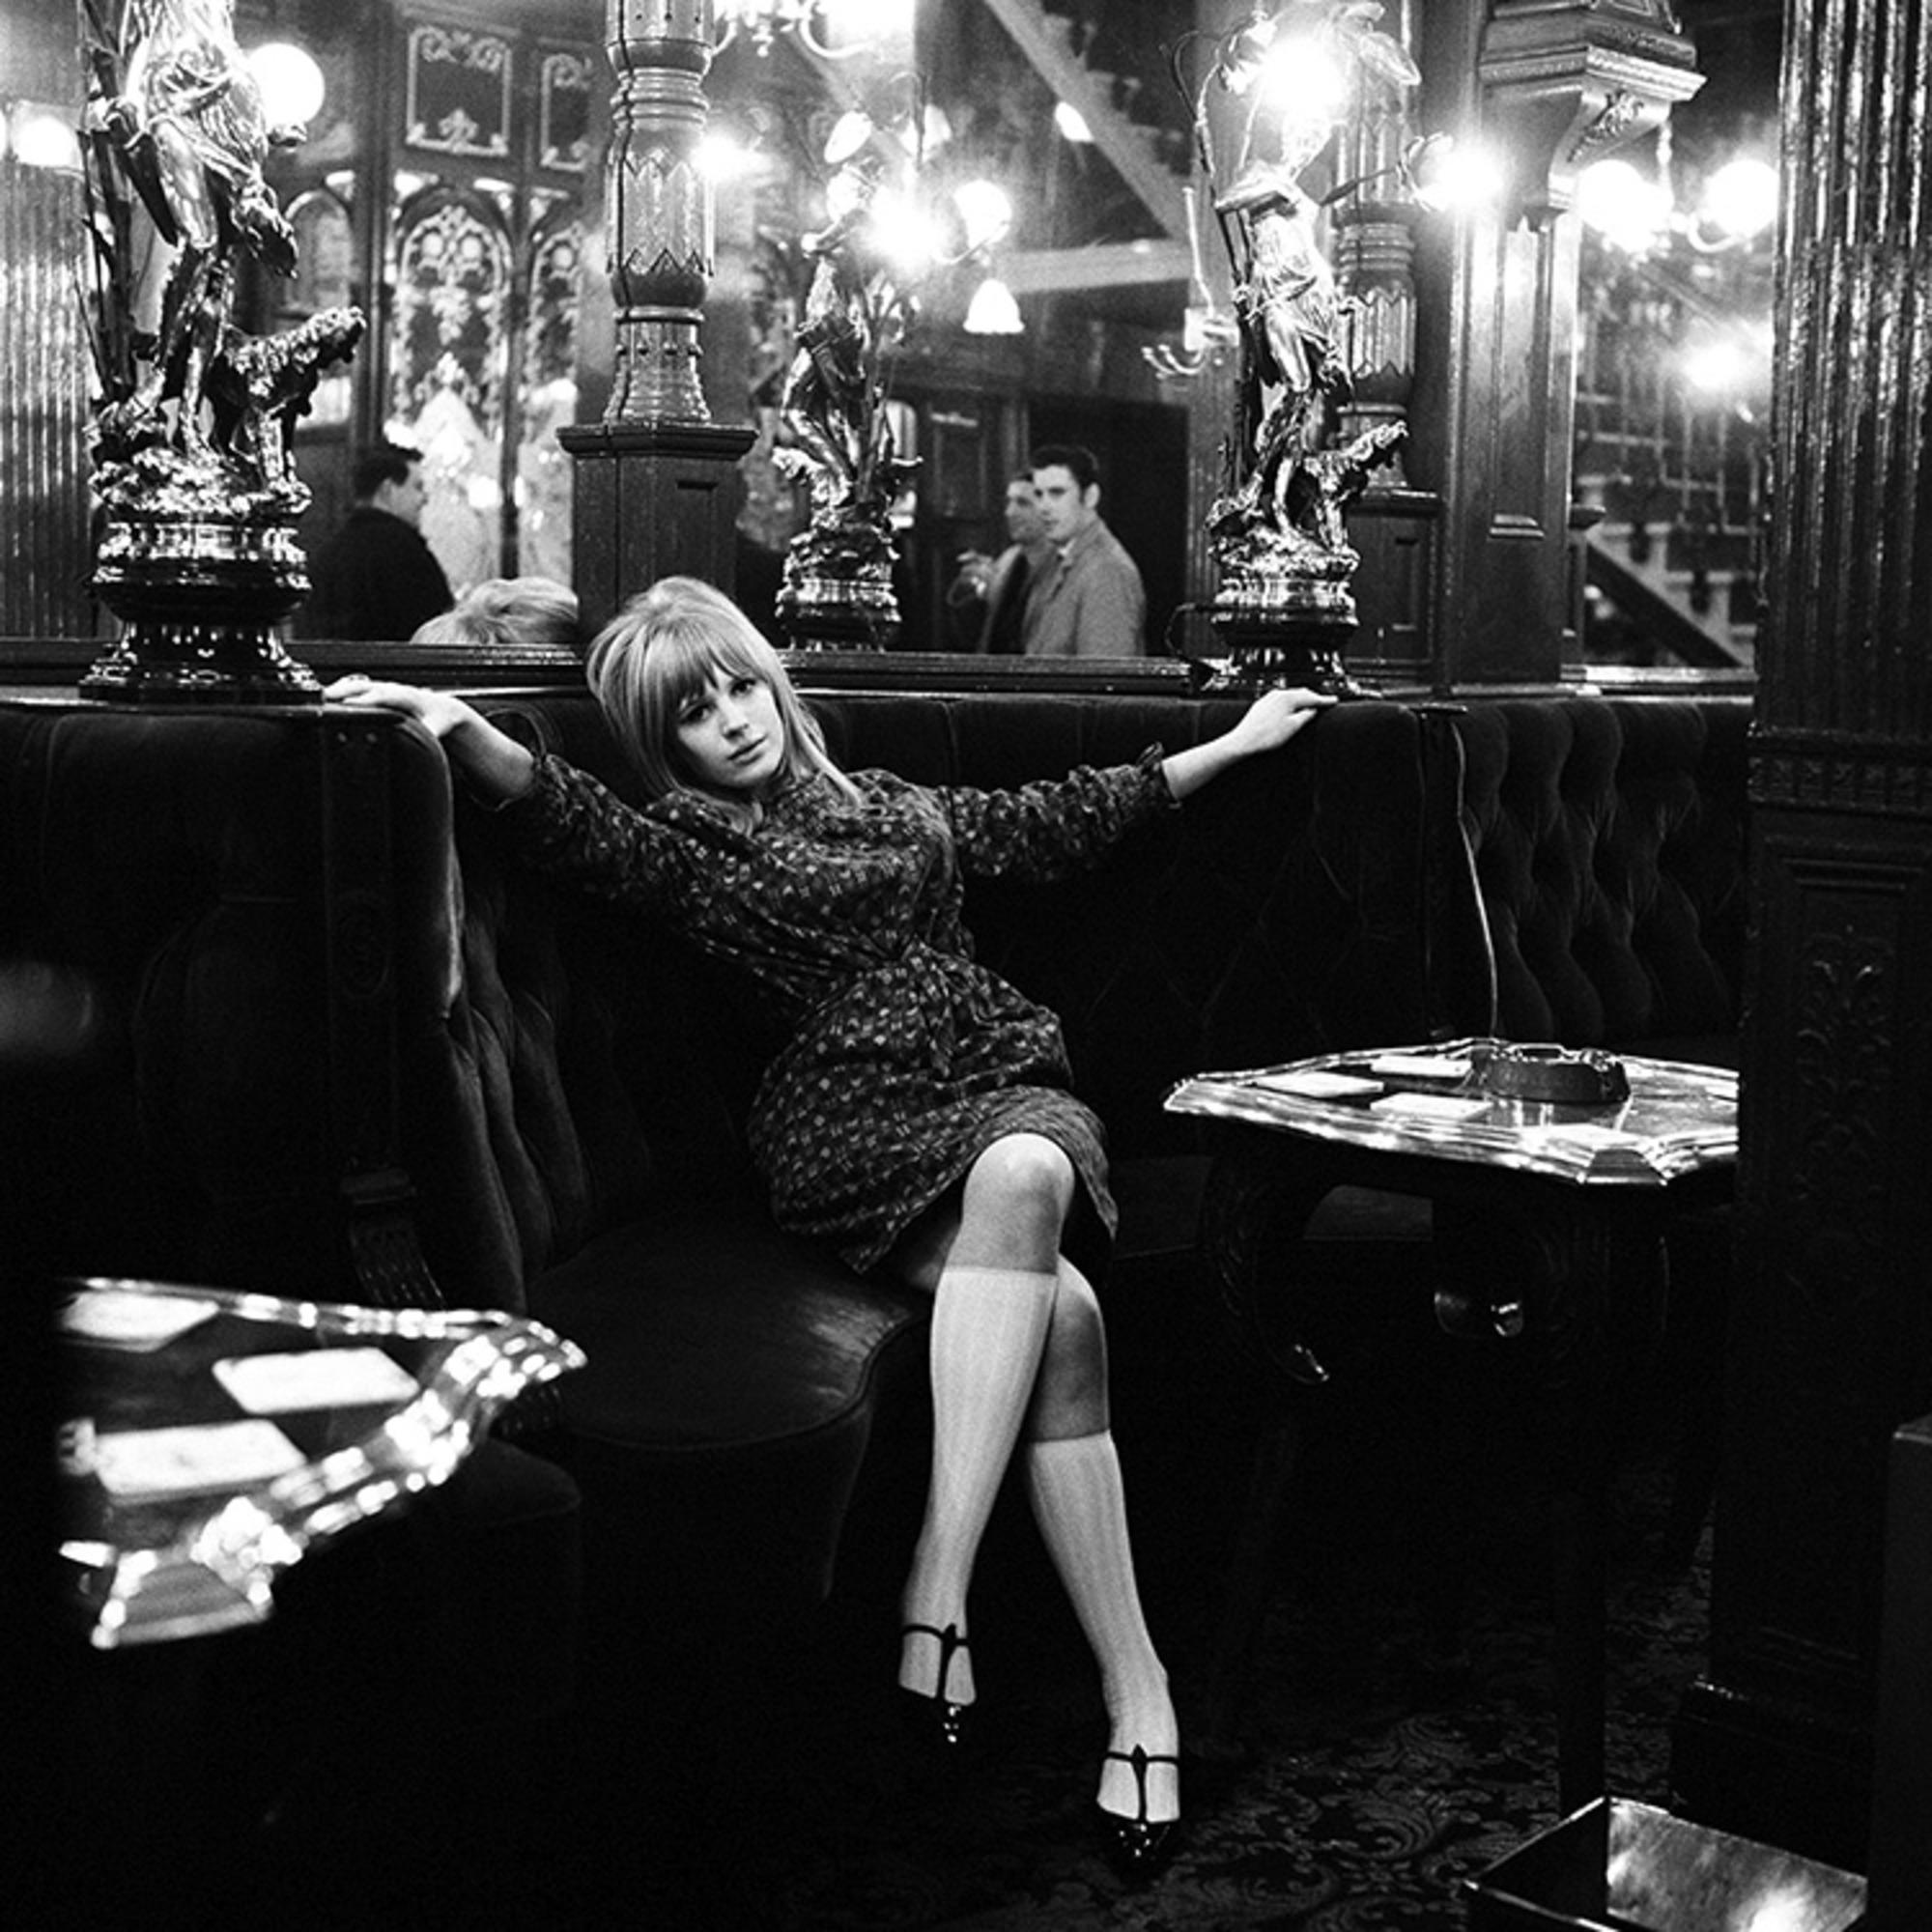 Gelatin-silver, signed and numbered

English singer, songwriter and actress Marianne Faithfull, photographed at The Salisbury pub in London, 1964.

Available Sizes:
16" x 20” Edition of 50
20" x 24” Edition of 50
30" x 40” Edition of 25
50” x 53”